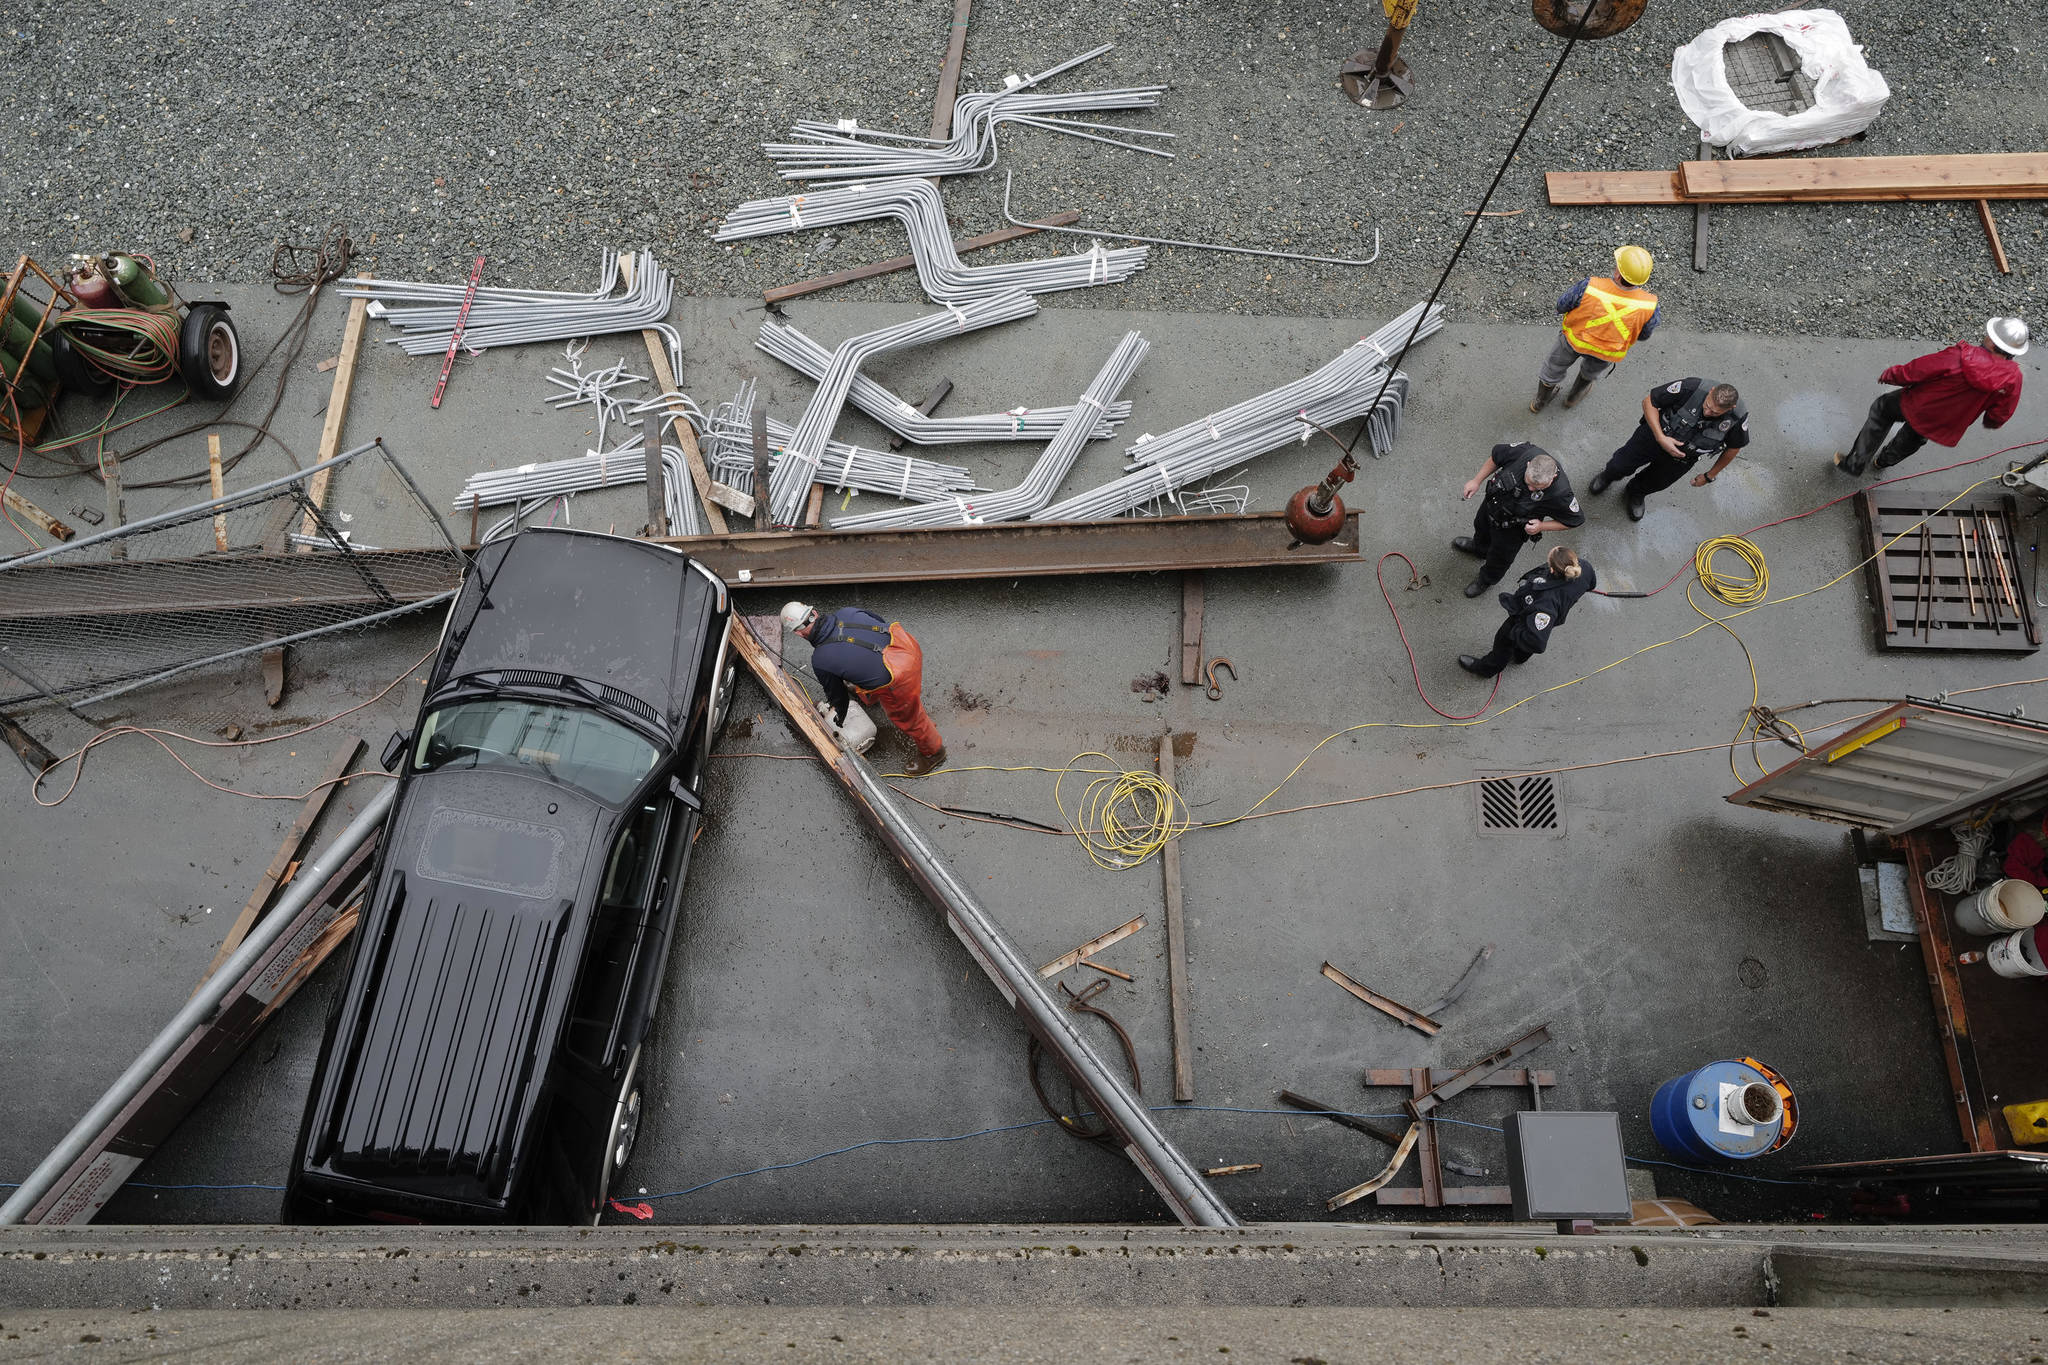 Juneau Police Department officers and Capital City Fire/Rescue personnel respond to an accident at the Downtown Public Library on Monday, Sept. 23, 2019. A construction worker was injured at a work site after a driver reportedly drove through the library parking barrier. (Michael Penn | Juneau Empire)